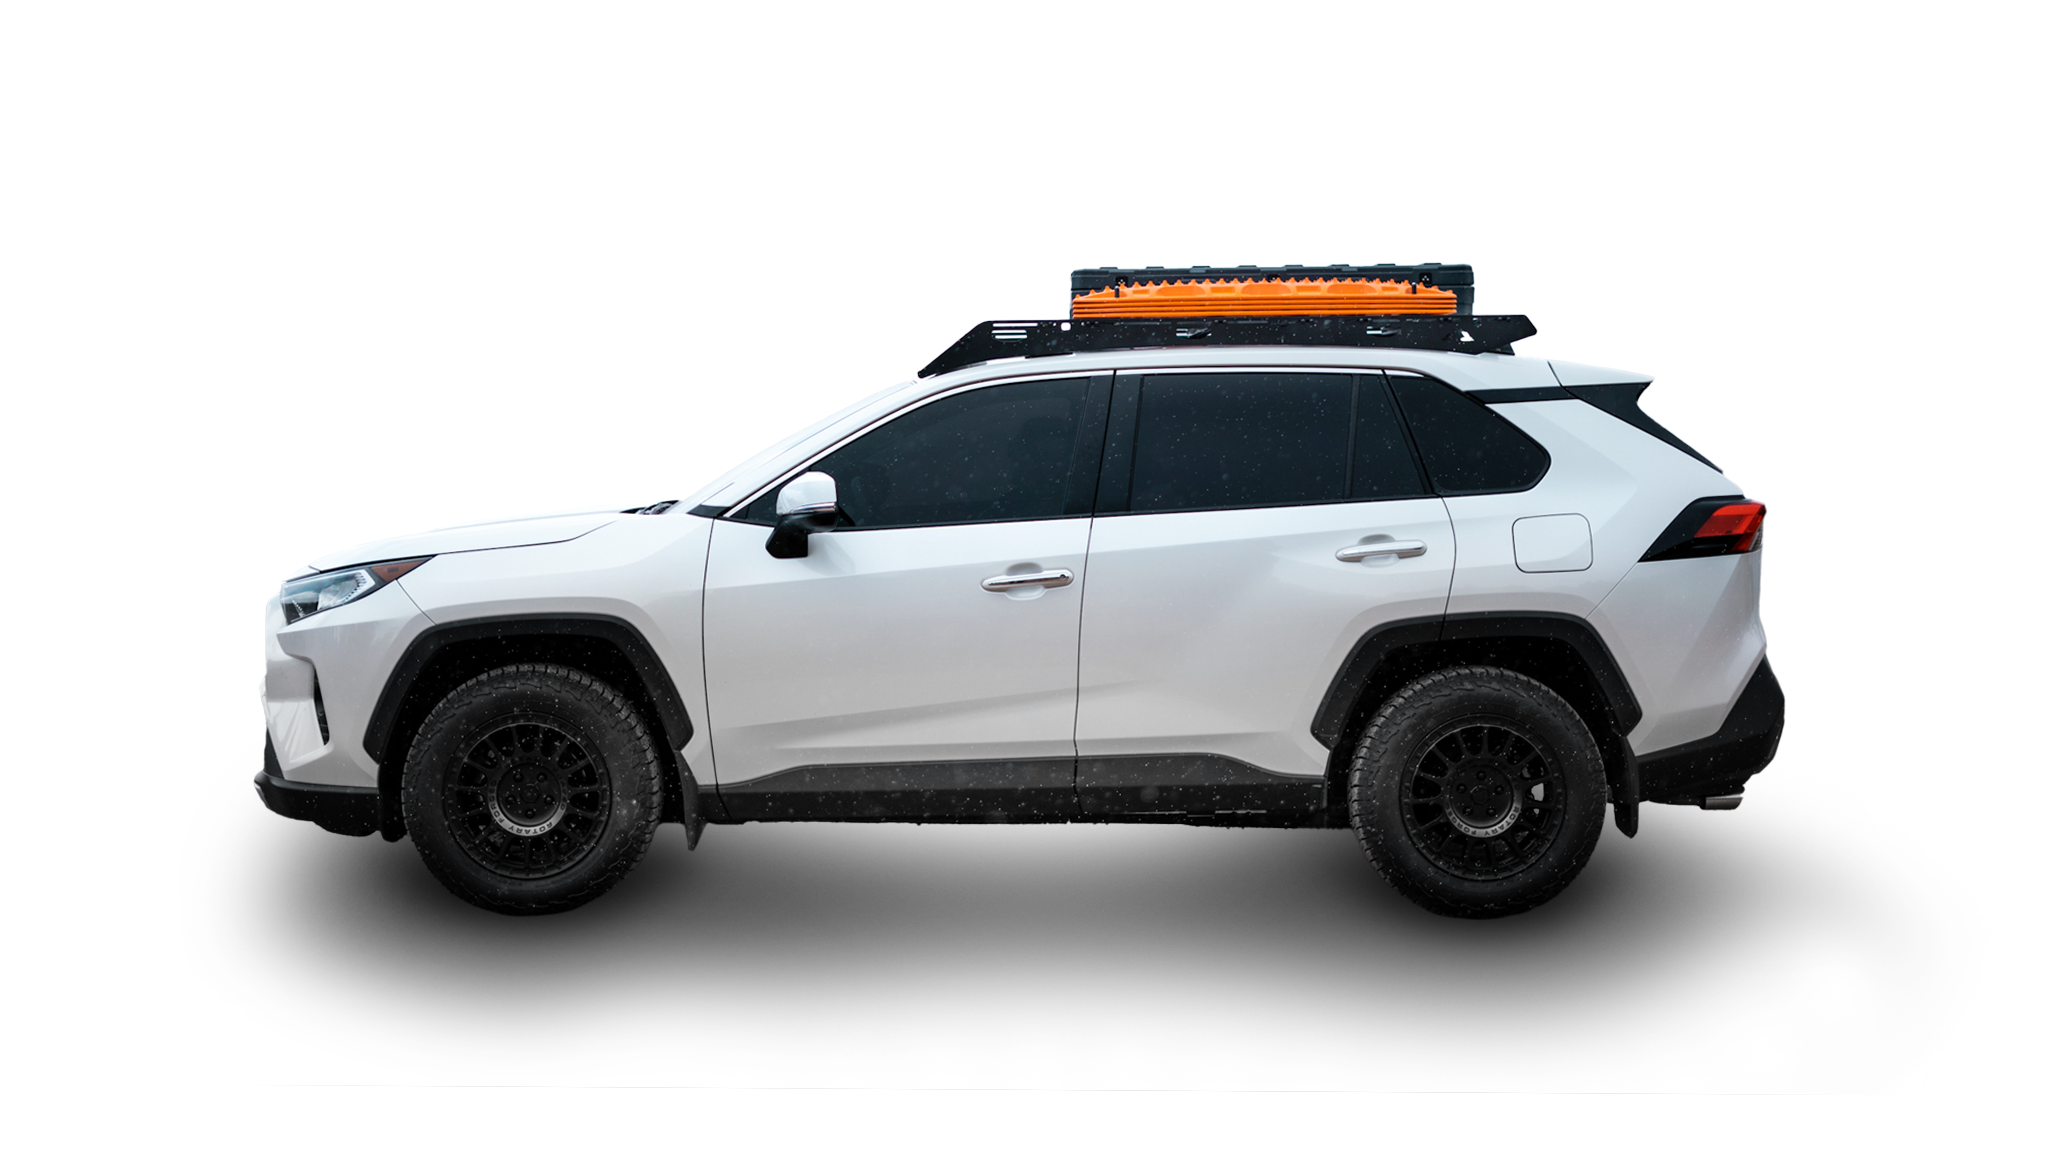 Toyota Rav4 Roof rack  Side view of rack on vehicle on white background